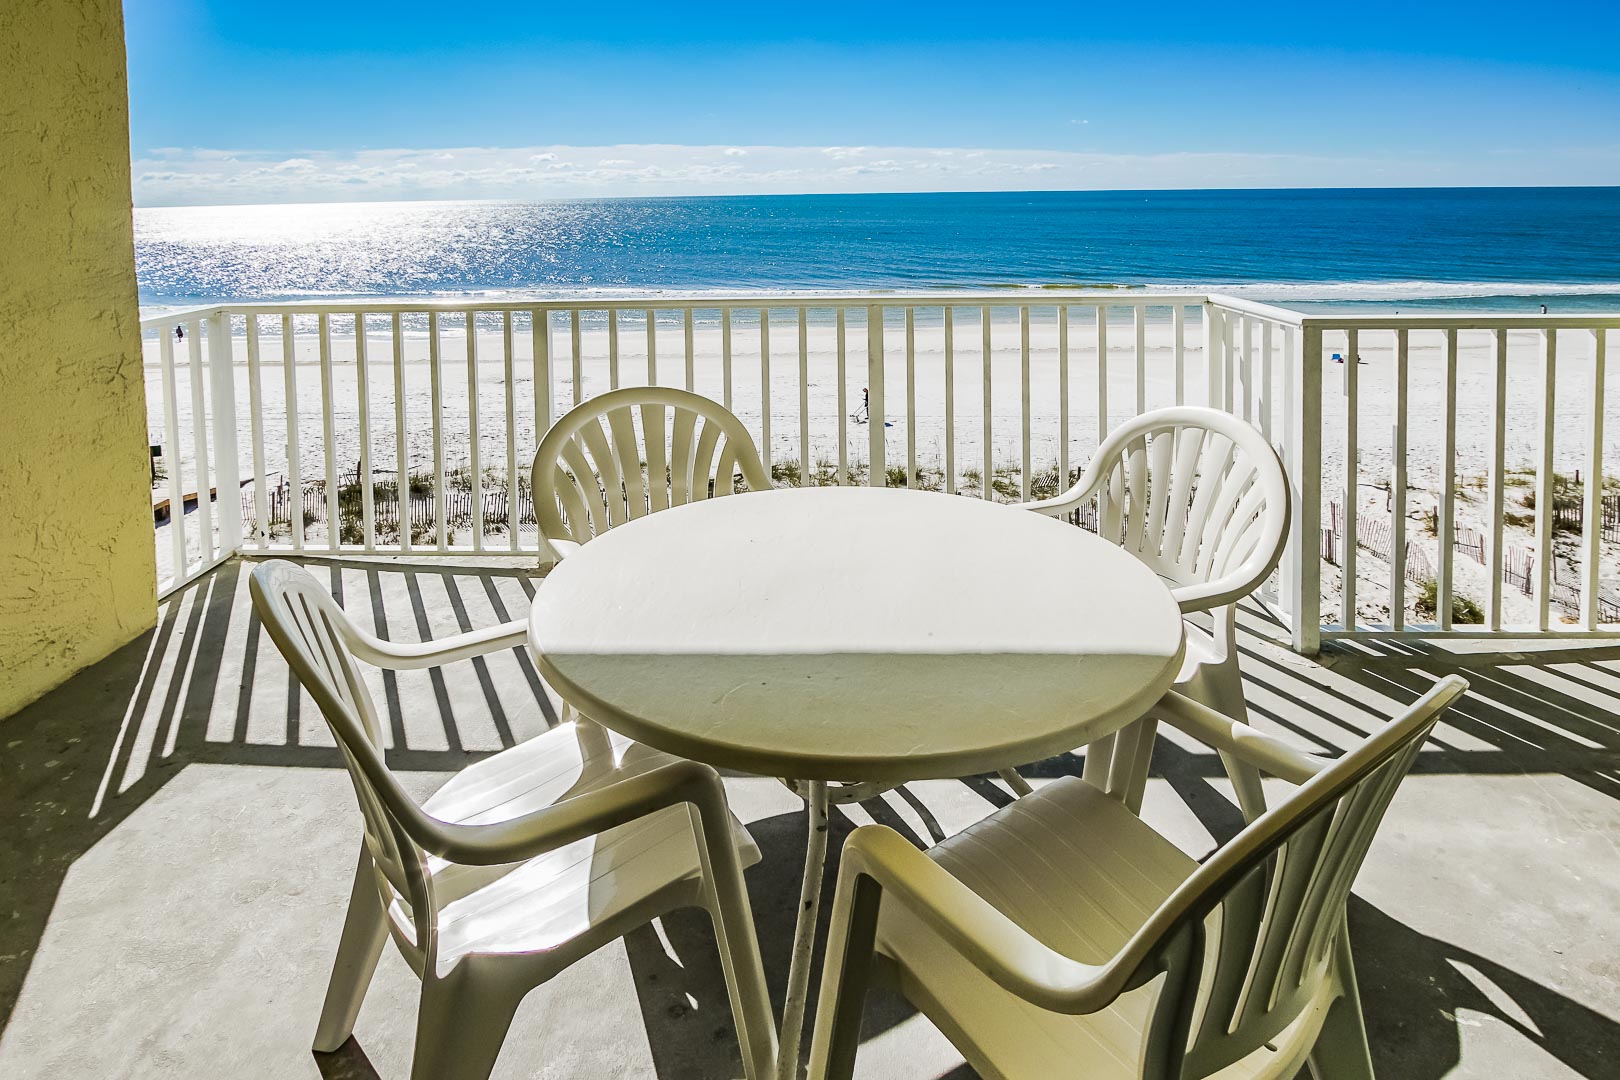 A beautiful view of the beach from the balcony at VRI's Shoreline Towers in Gulf Shores, Alabama.